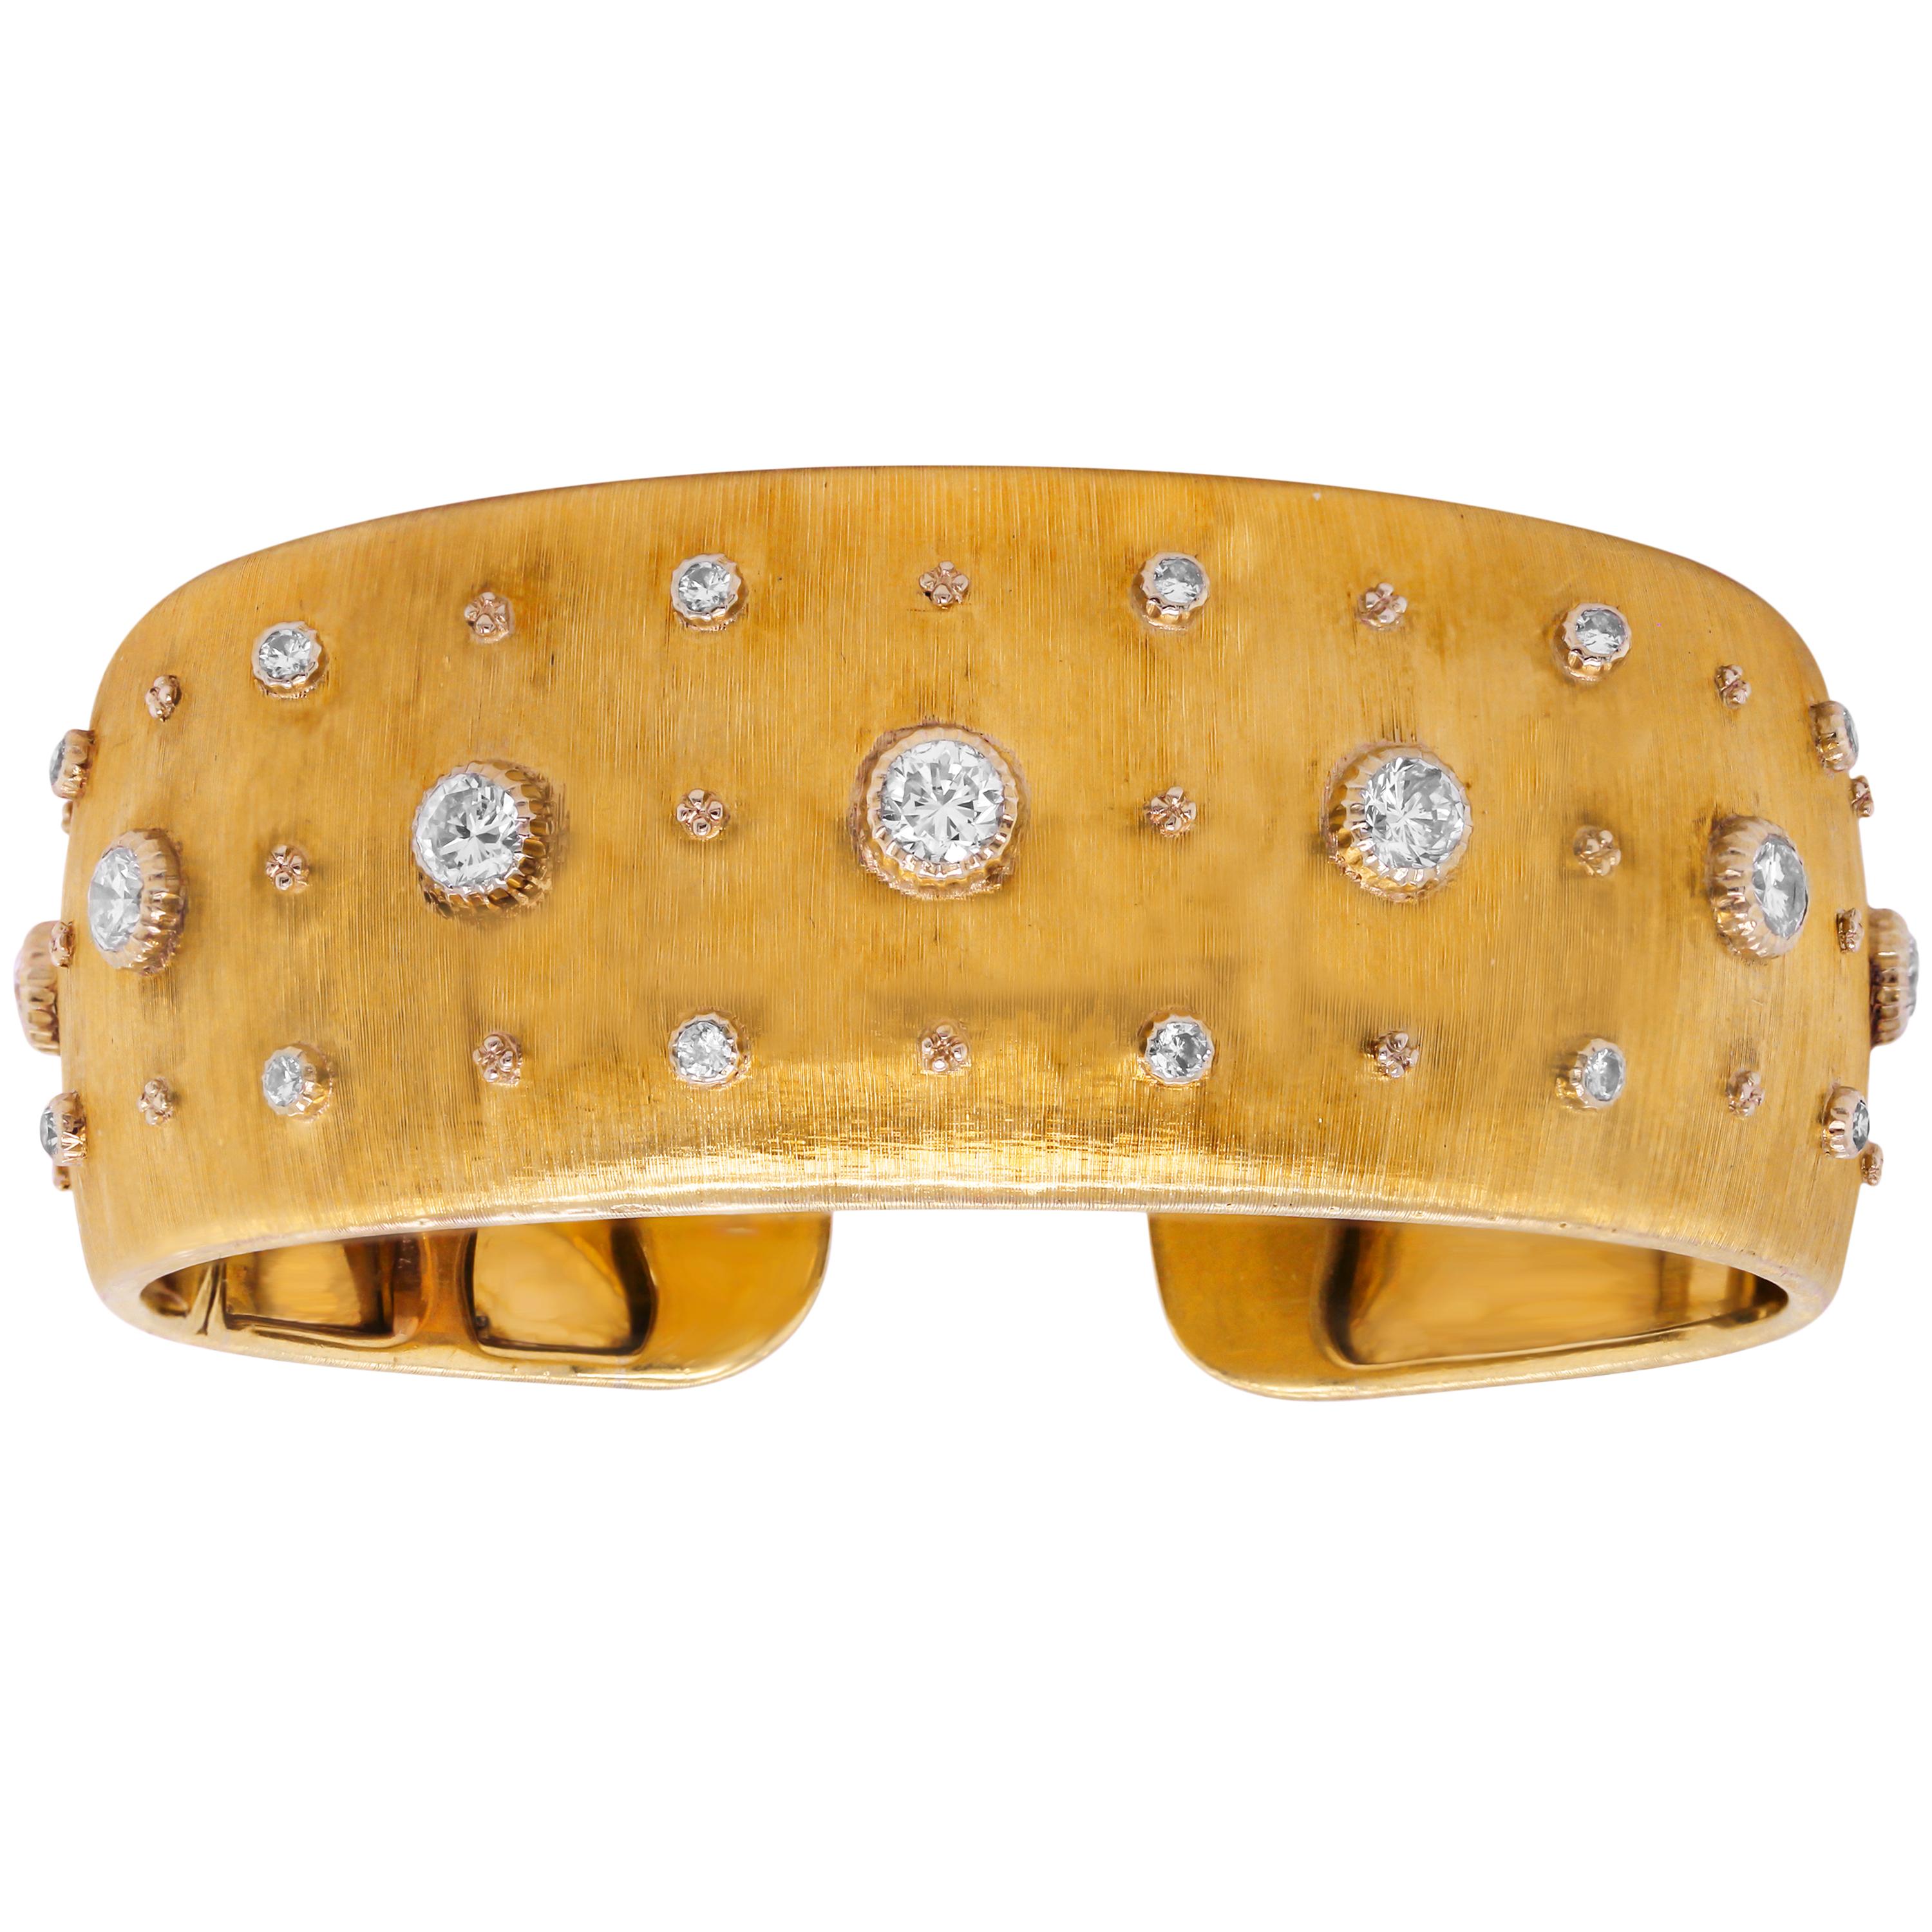 Buccellati 18 Karat Brushed Yellow Gold Diamond Cuff Bangle Bracelet

A state-of-the-art, handmade cuff by Buccellati. This cuff is finished in a brushed, matte, finishing with diamonds set in the center.

Apprx. 2.30 carat G color, VS clarity